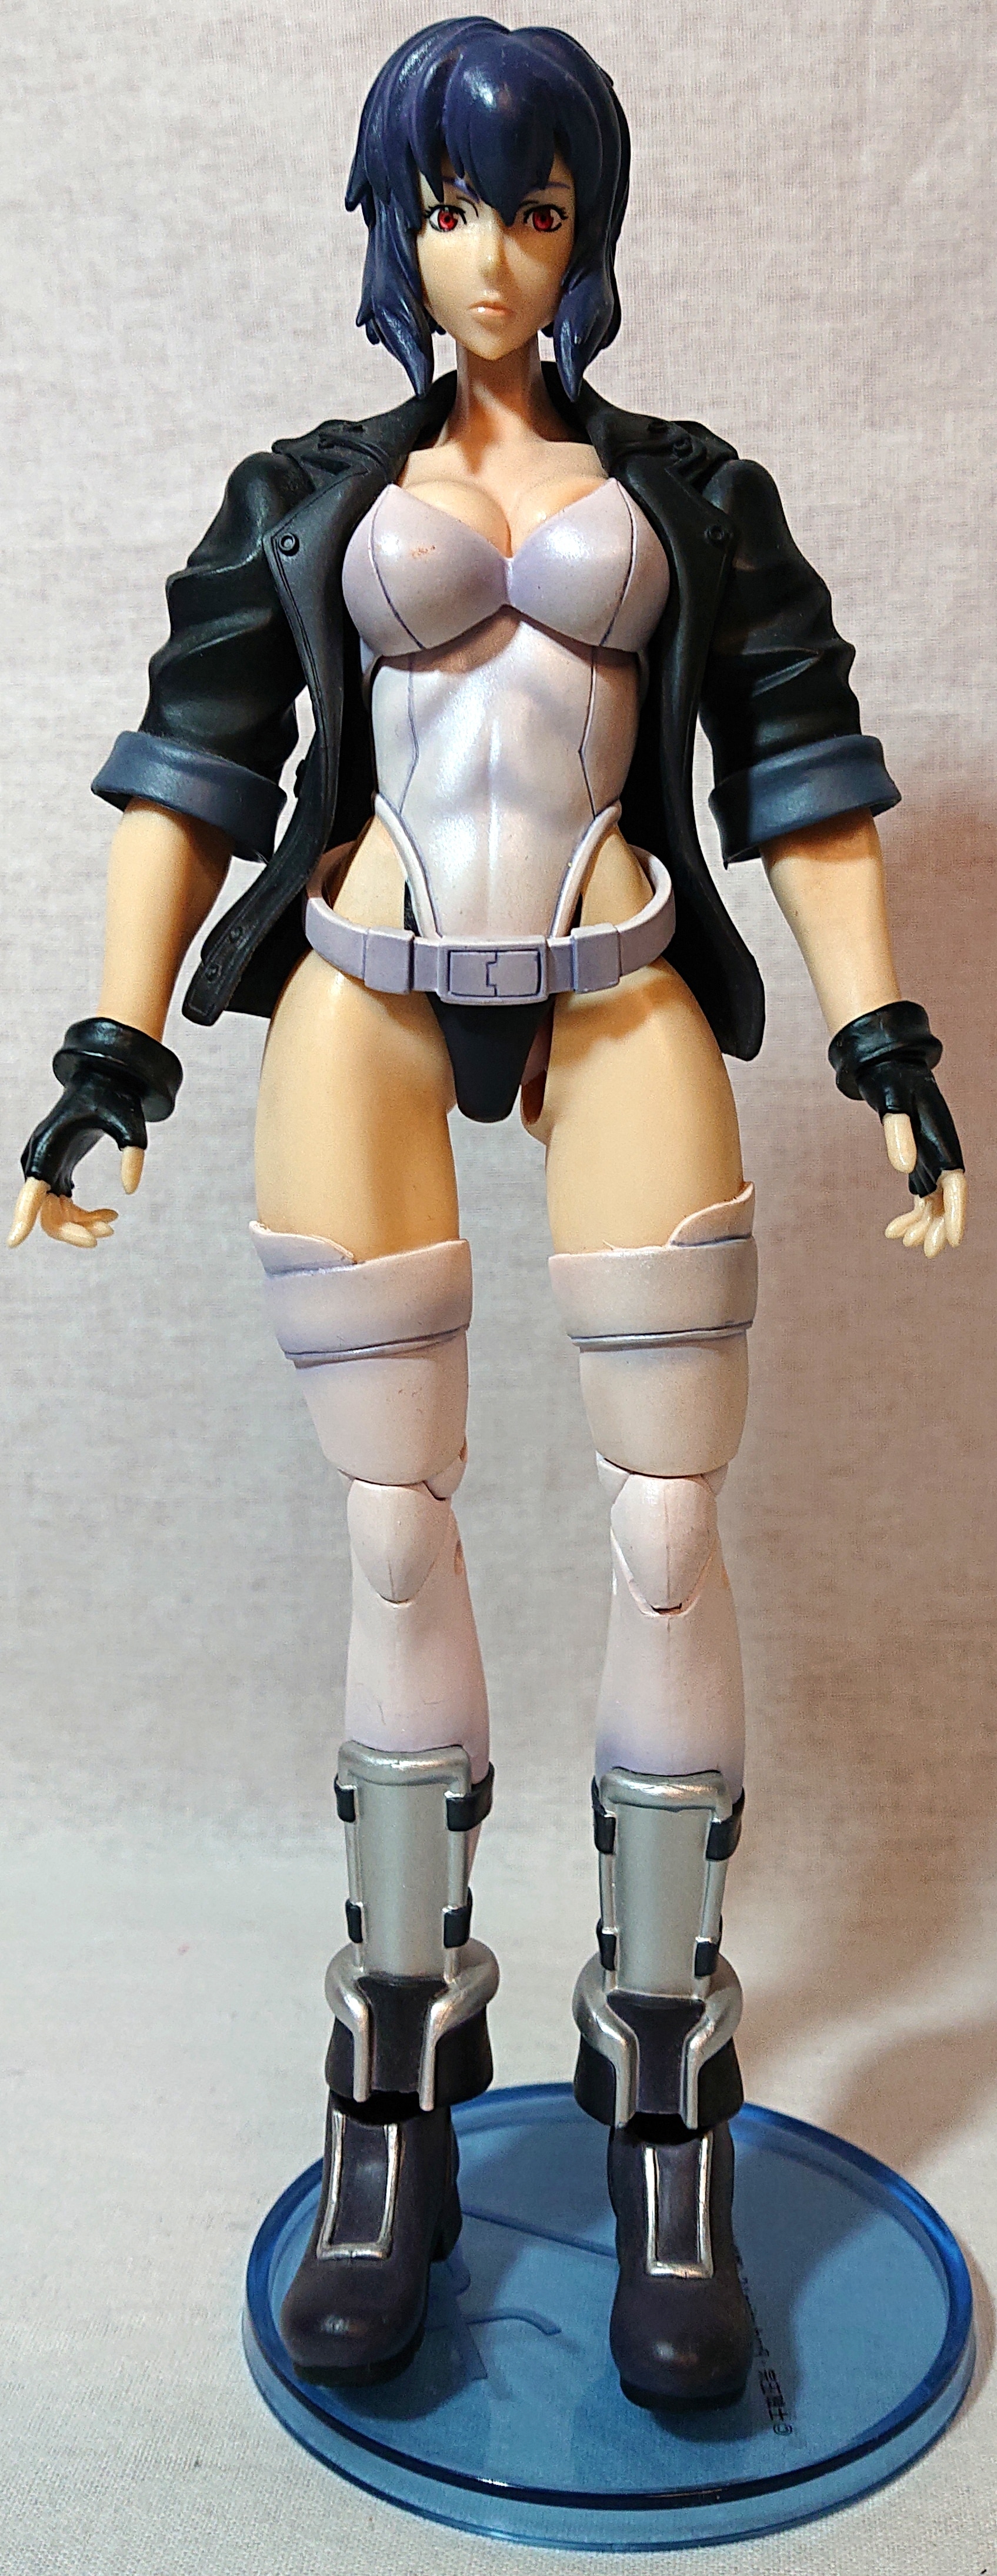 Yamato Ghost in the Shell 7 inch Anime Figure - ManMachine Motoko (sexy  pose) - now $29.95 and shipping is free*.